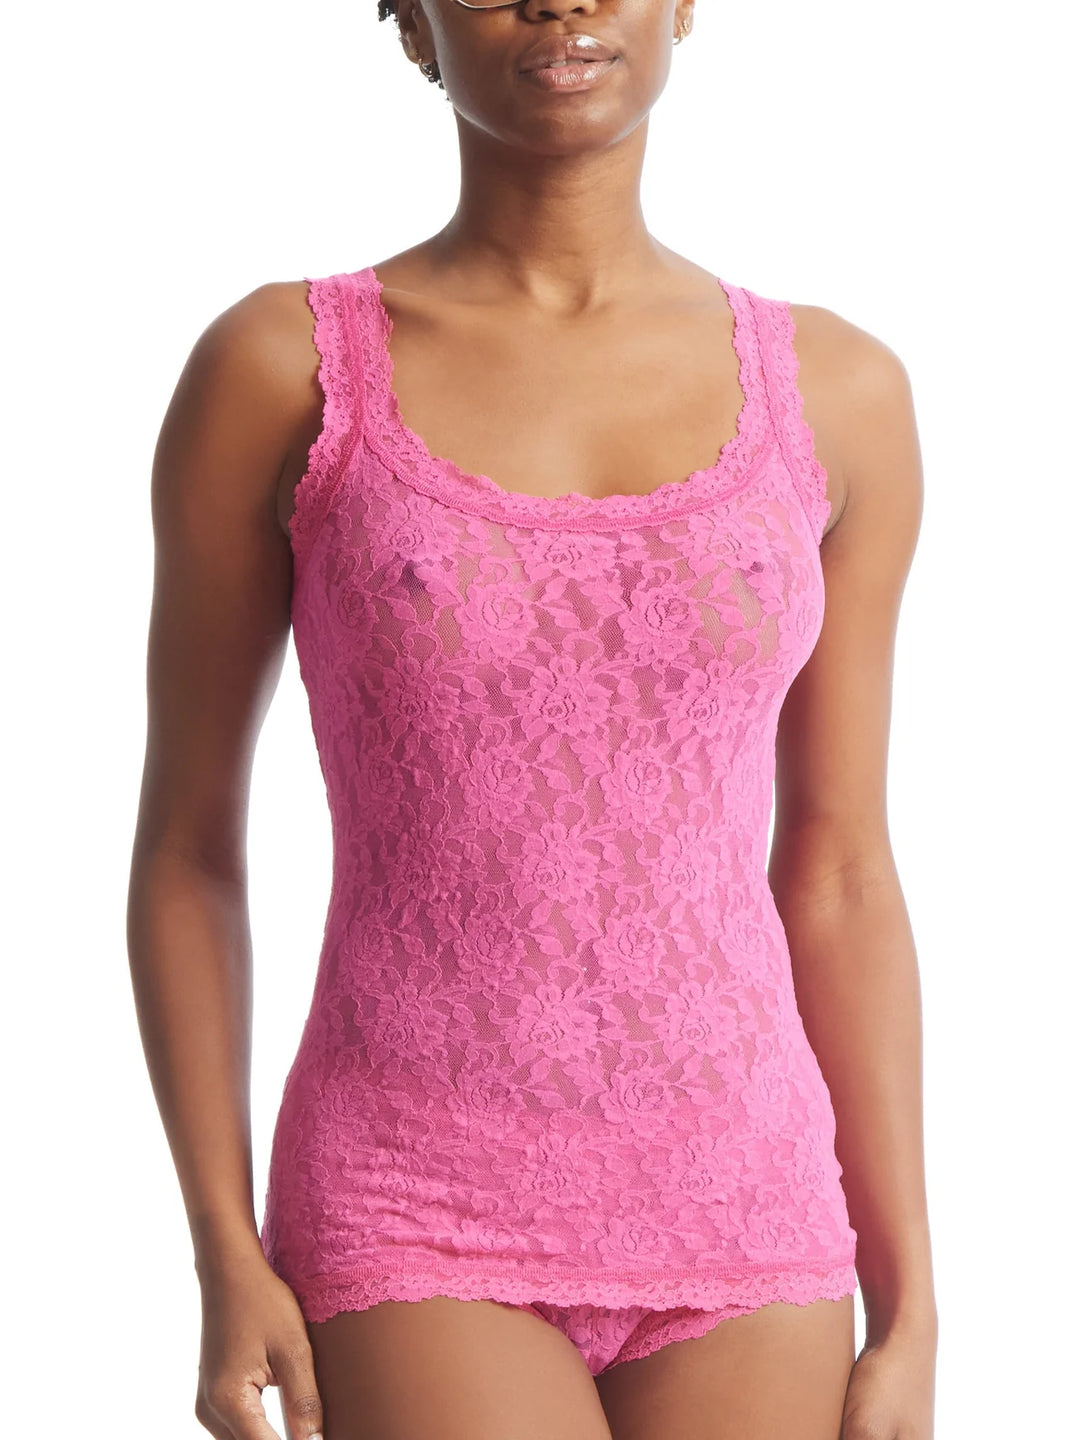 Hanky Panky Signature Lace Cami - Intuition